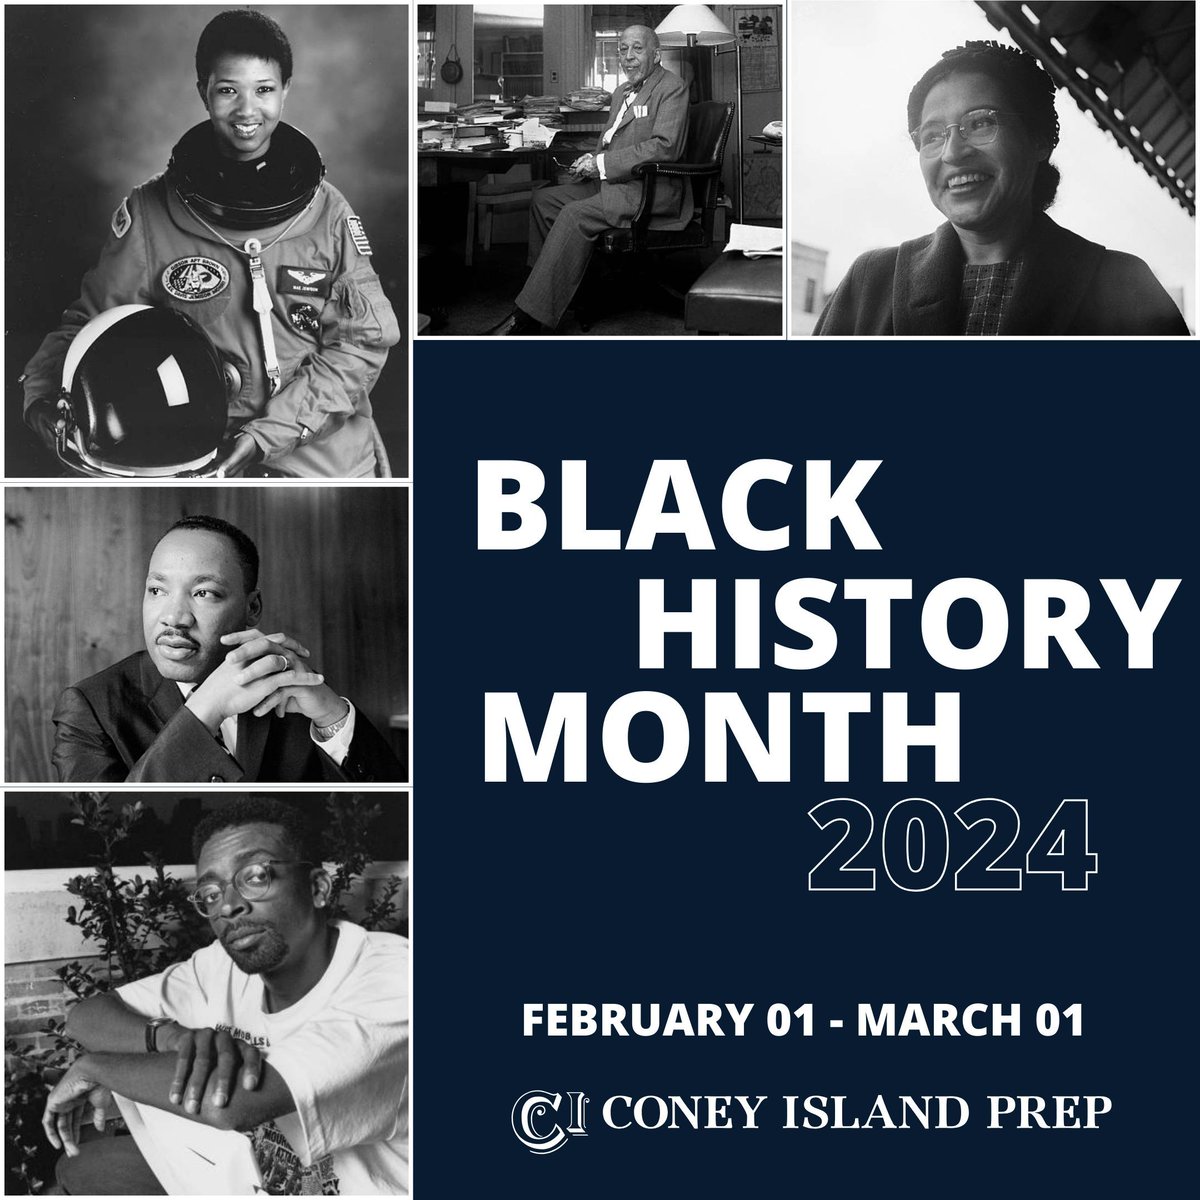 This Black History Month, Coney Island Prep scholars are embarking on a journey through the rich history and contributions of African Americans. From science to the arts, let's discover the stories that shape our nation and inspire our futures. Stay tuned for events during BHM!